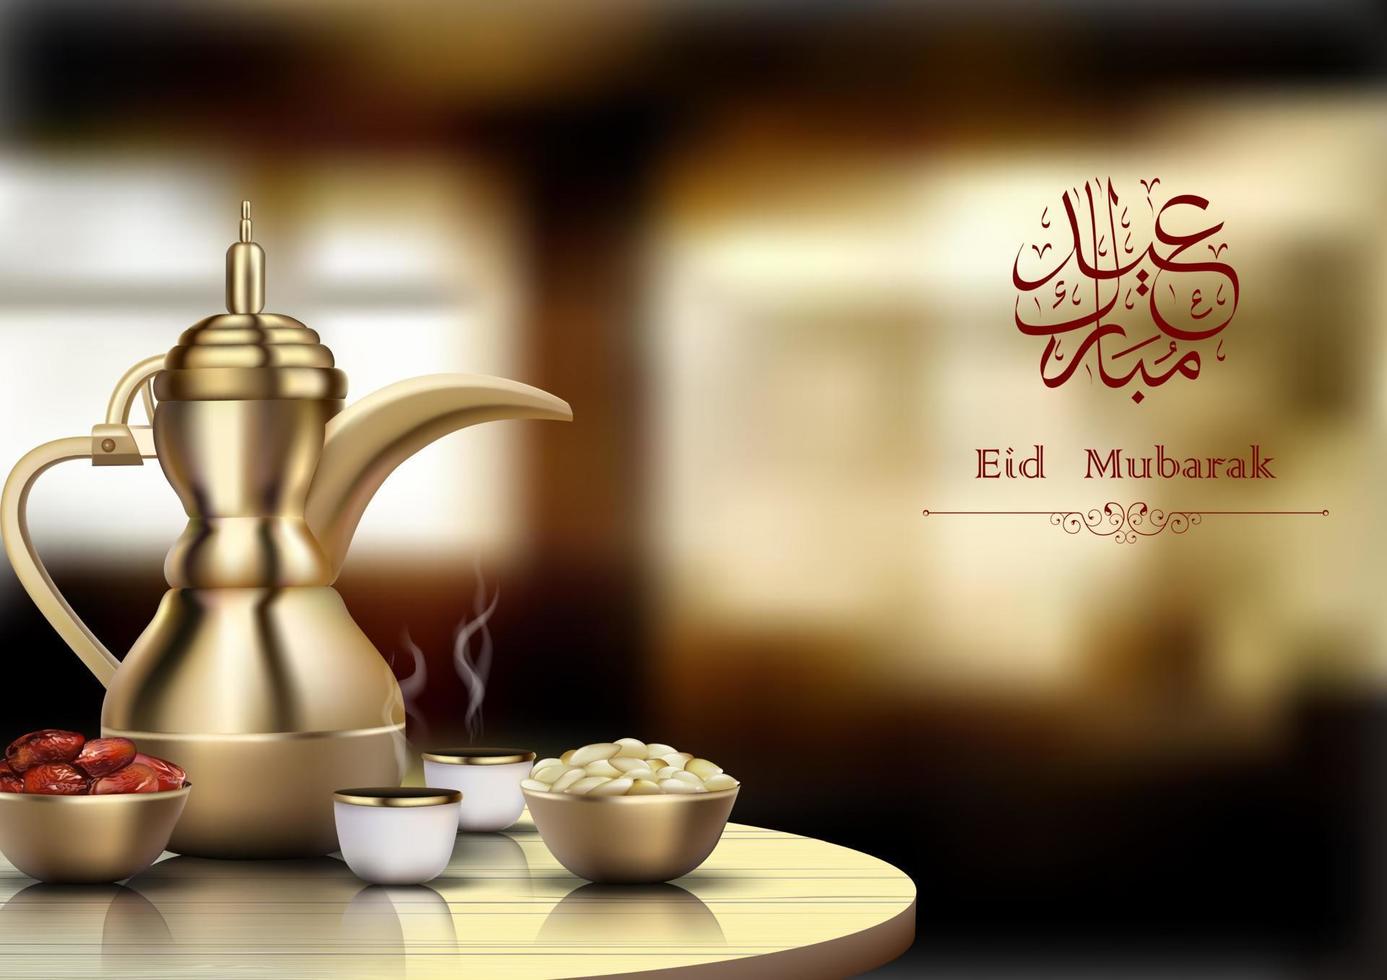 Eid Mubarak background. Iftar party celebration with traditional arabic dishes and arabic calligraphy vector